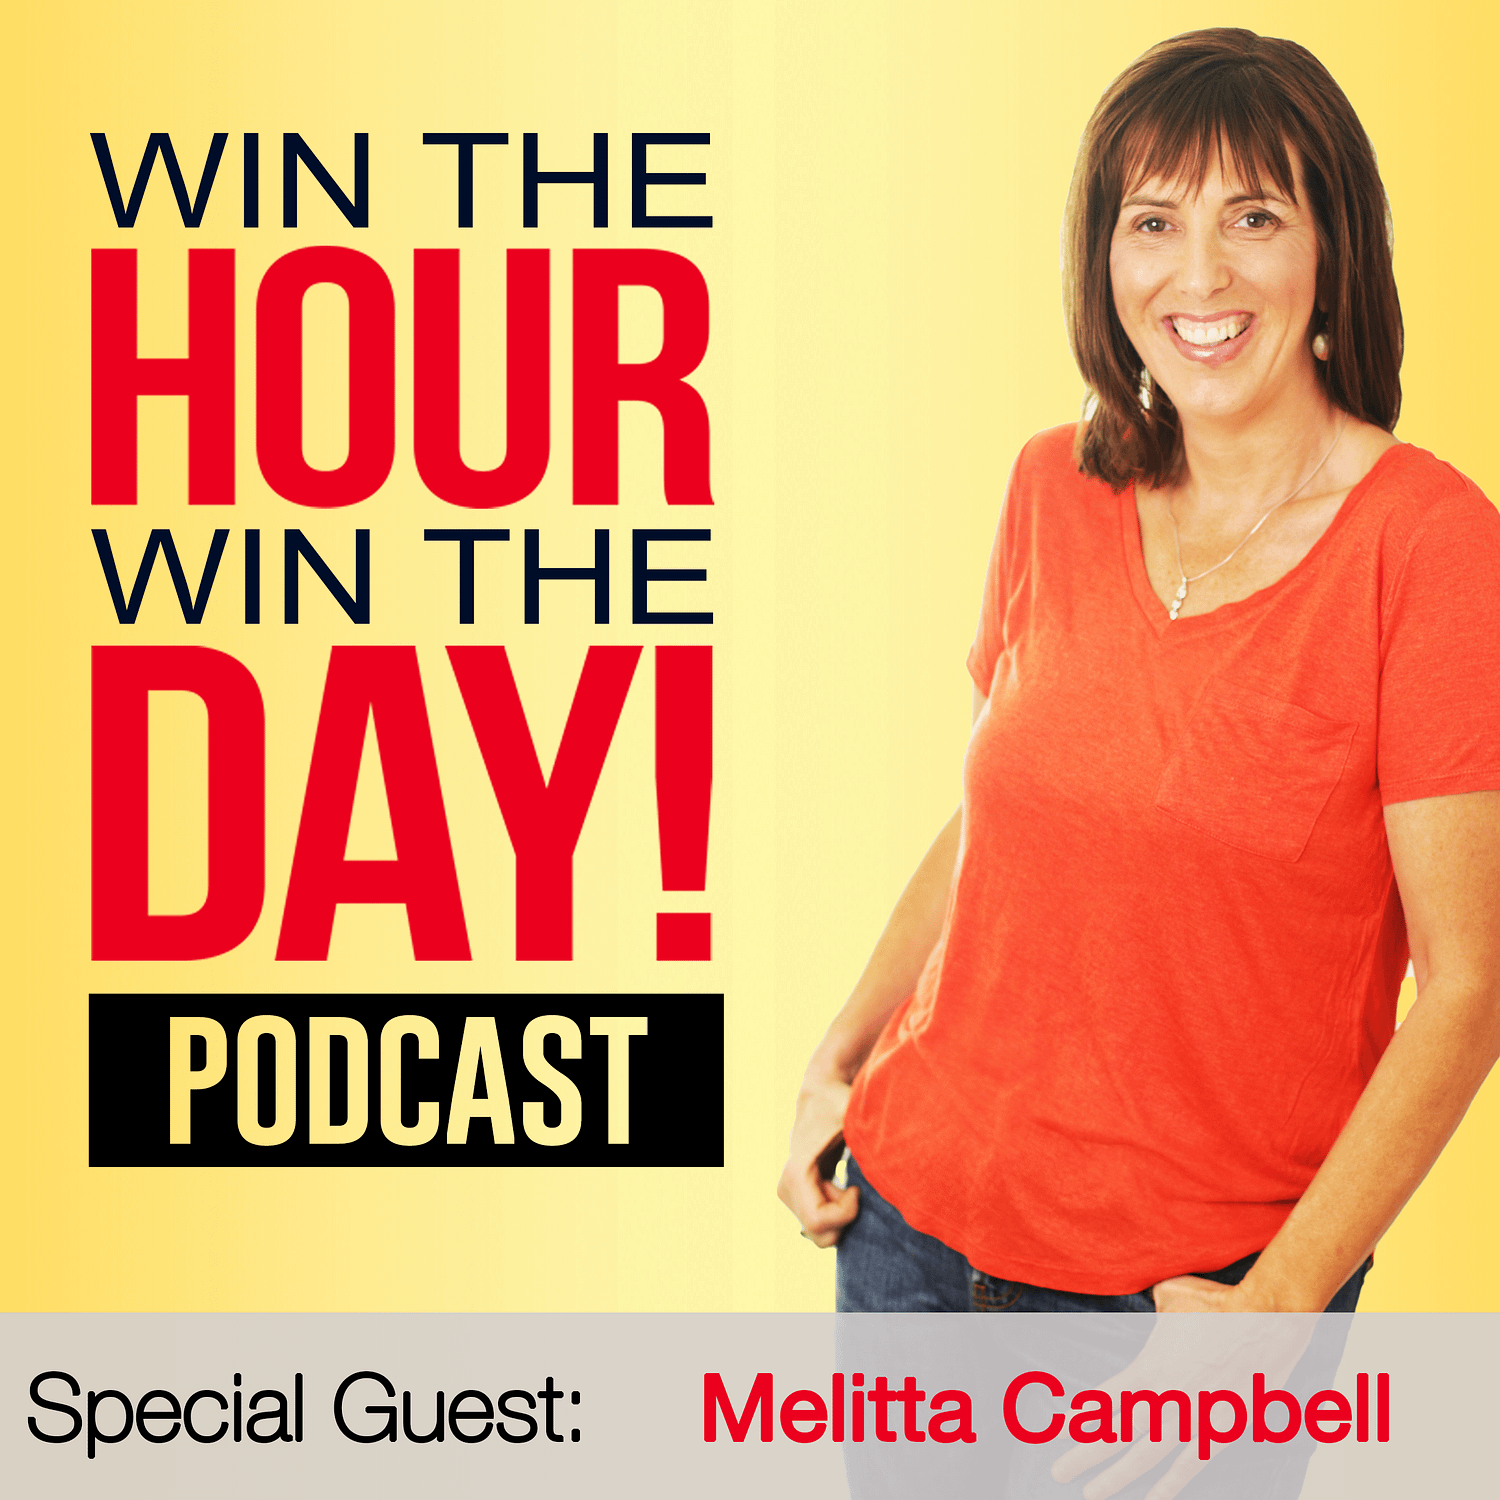 Networking And The Importance Of Showing Up! with Melitta Campbell